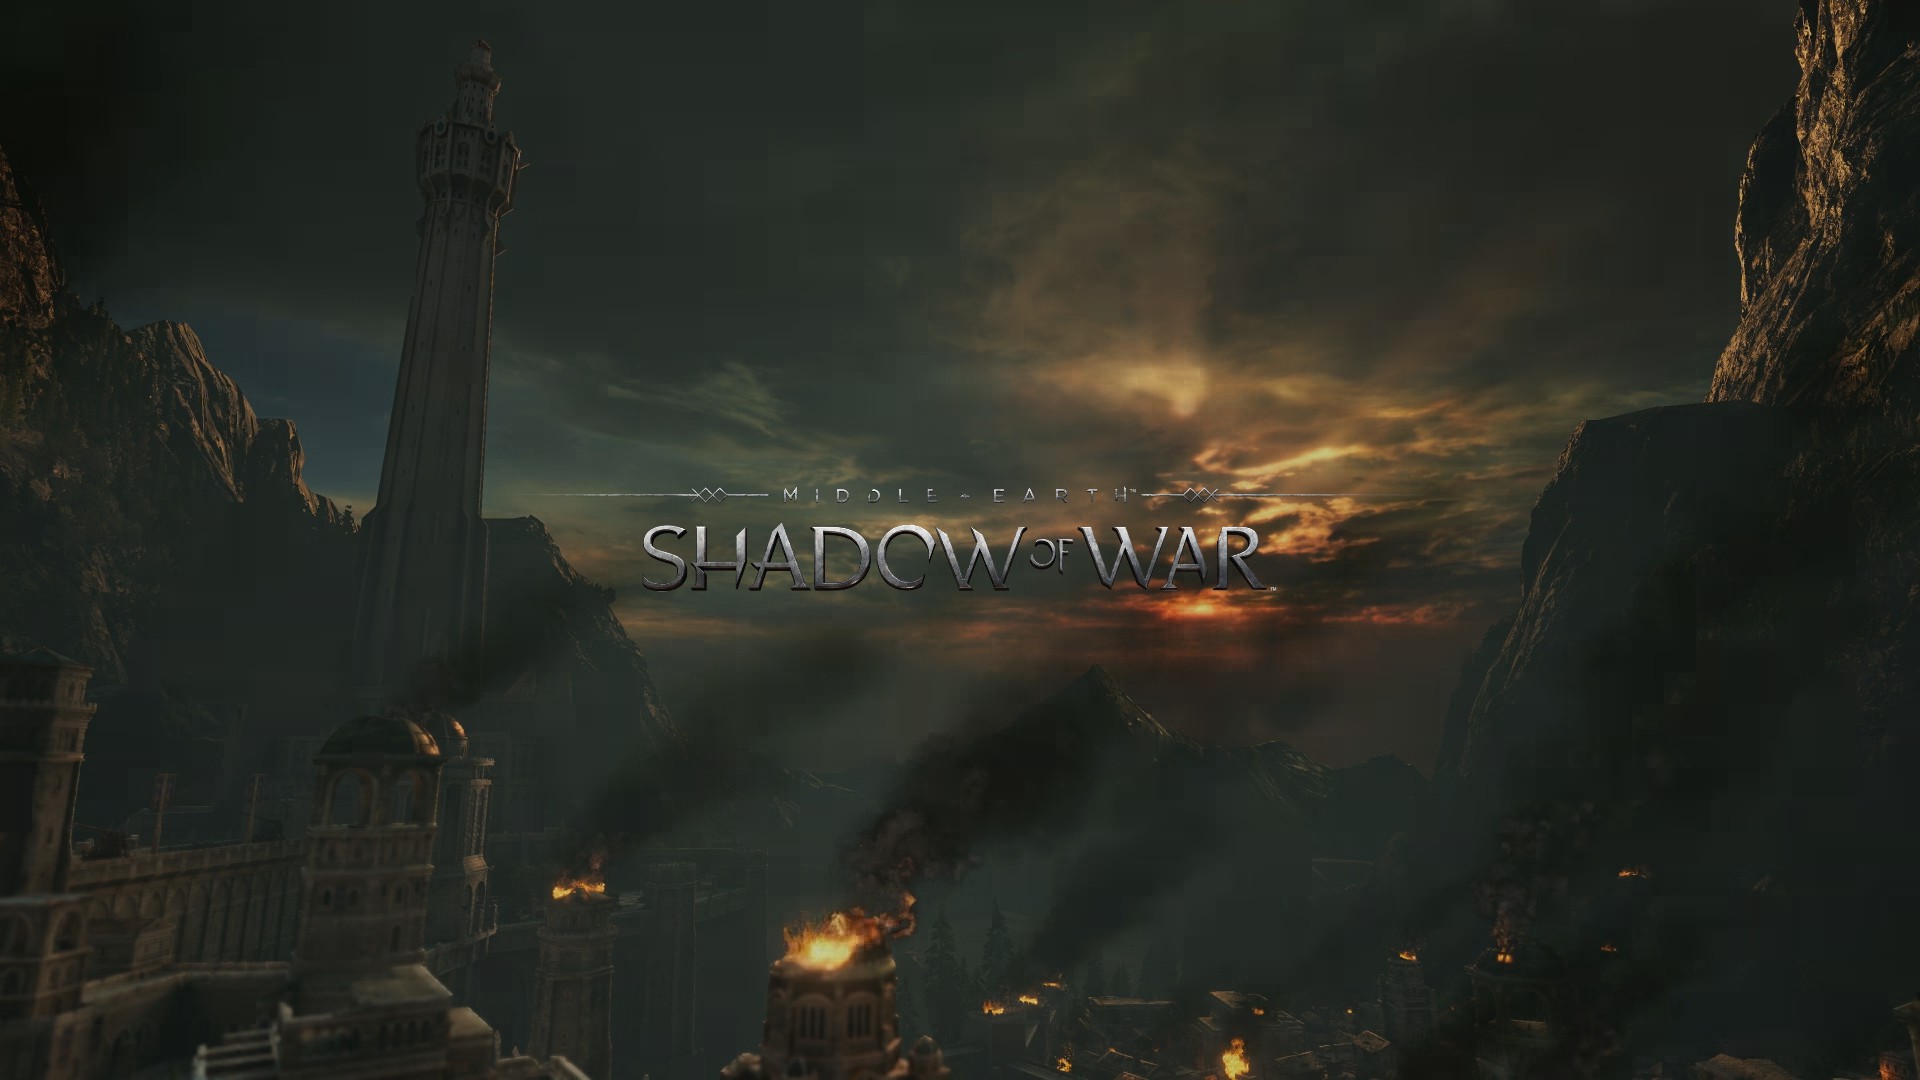 Steam Community :: Guide :: Middle-earth: Shadow of War - General Guide